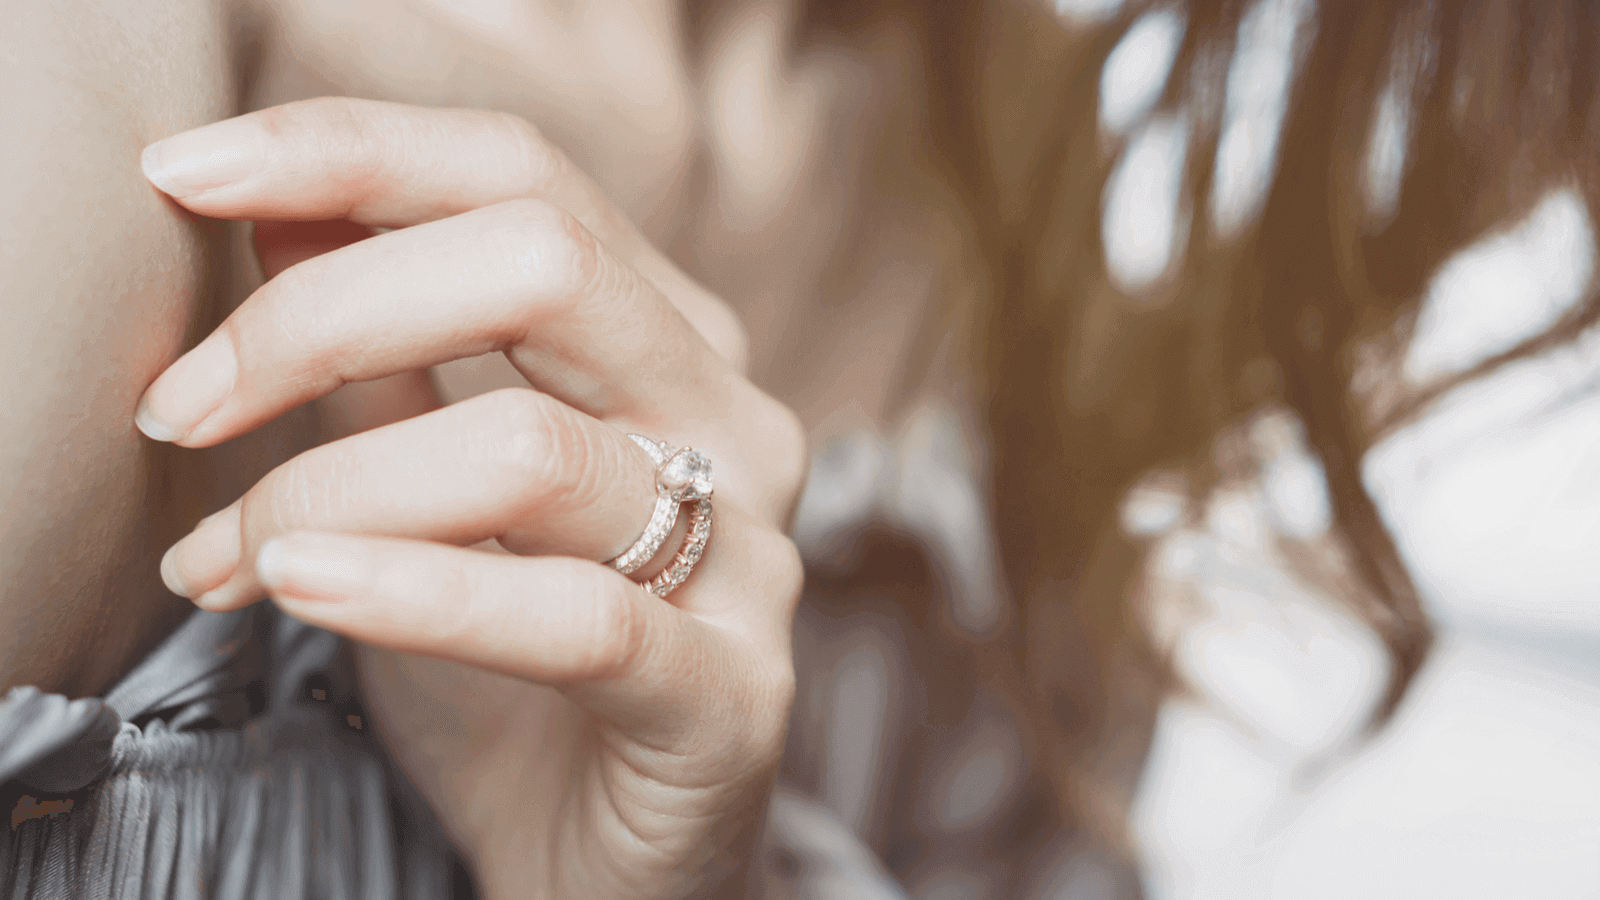  Close up of a woman's hands wearing stacked wedding ring and engagement ring